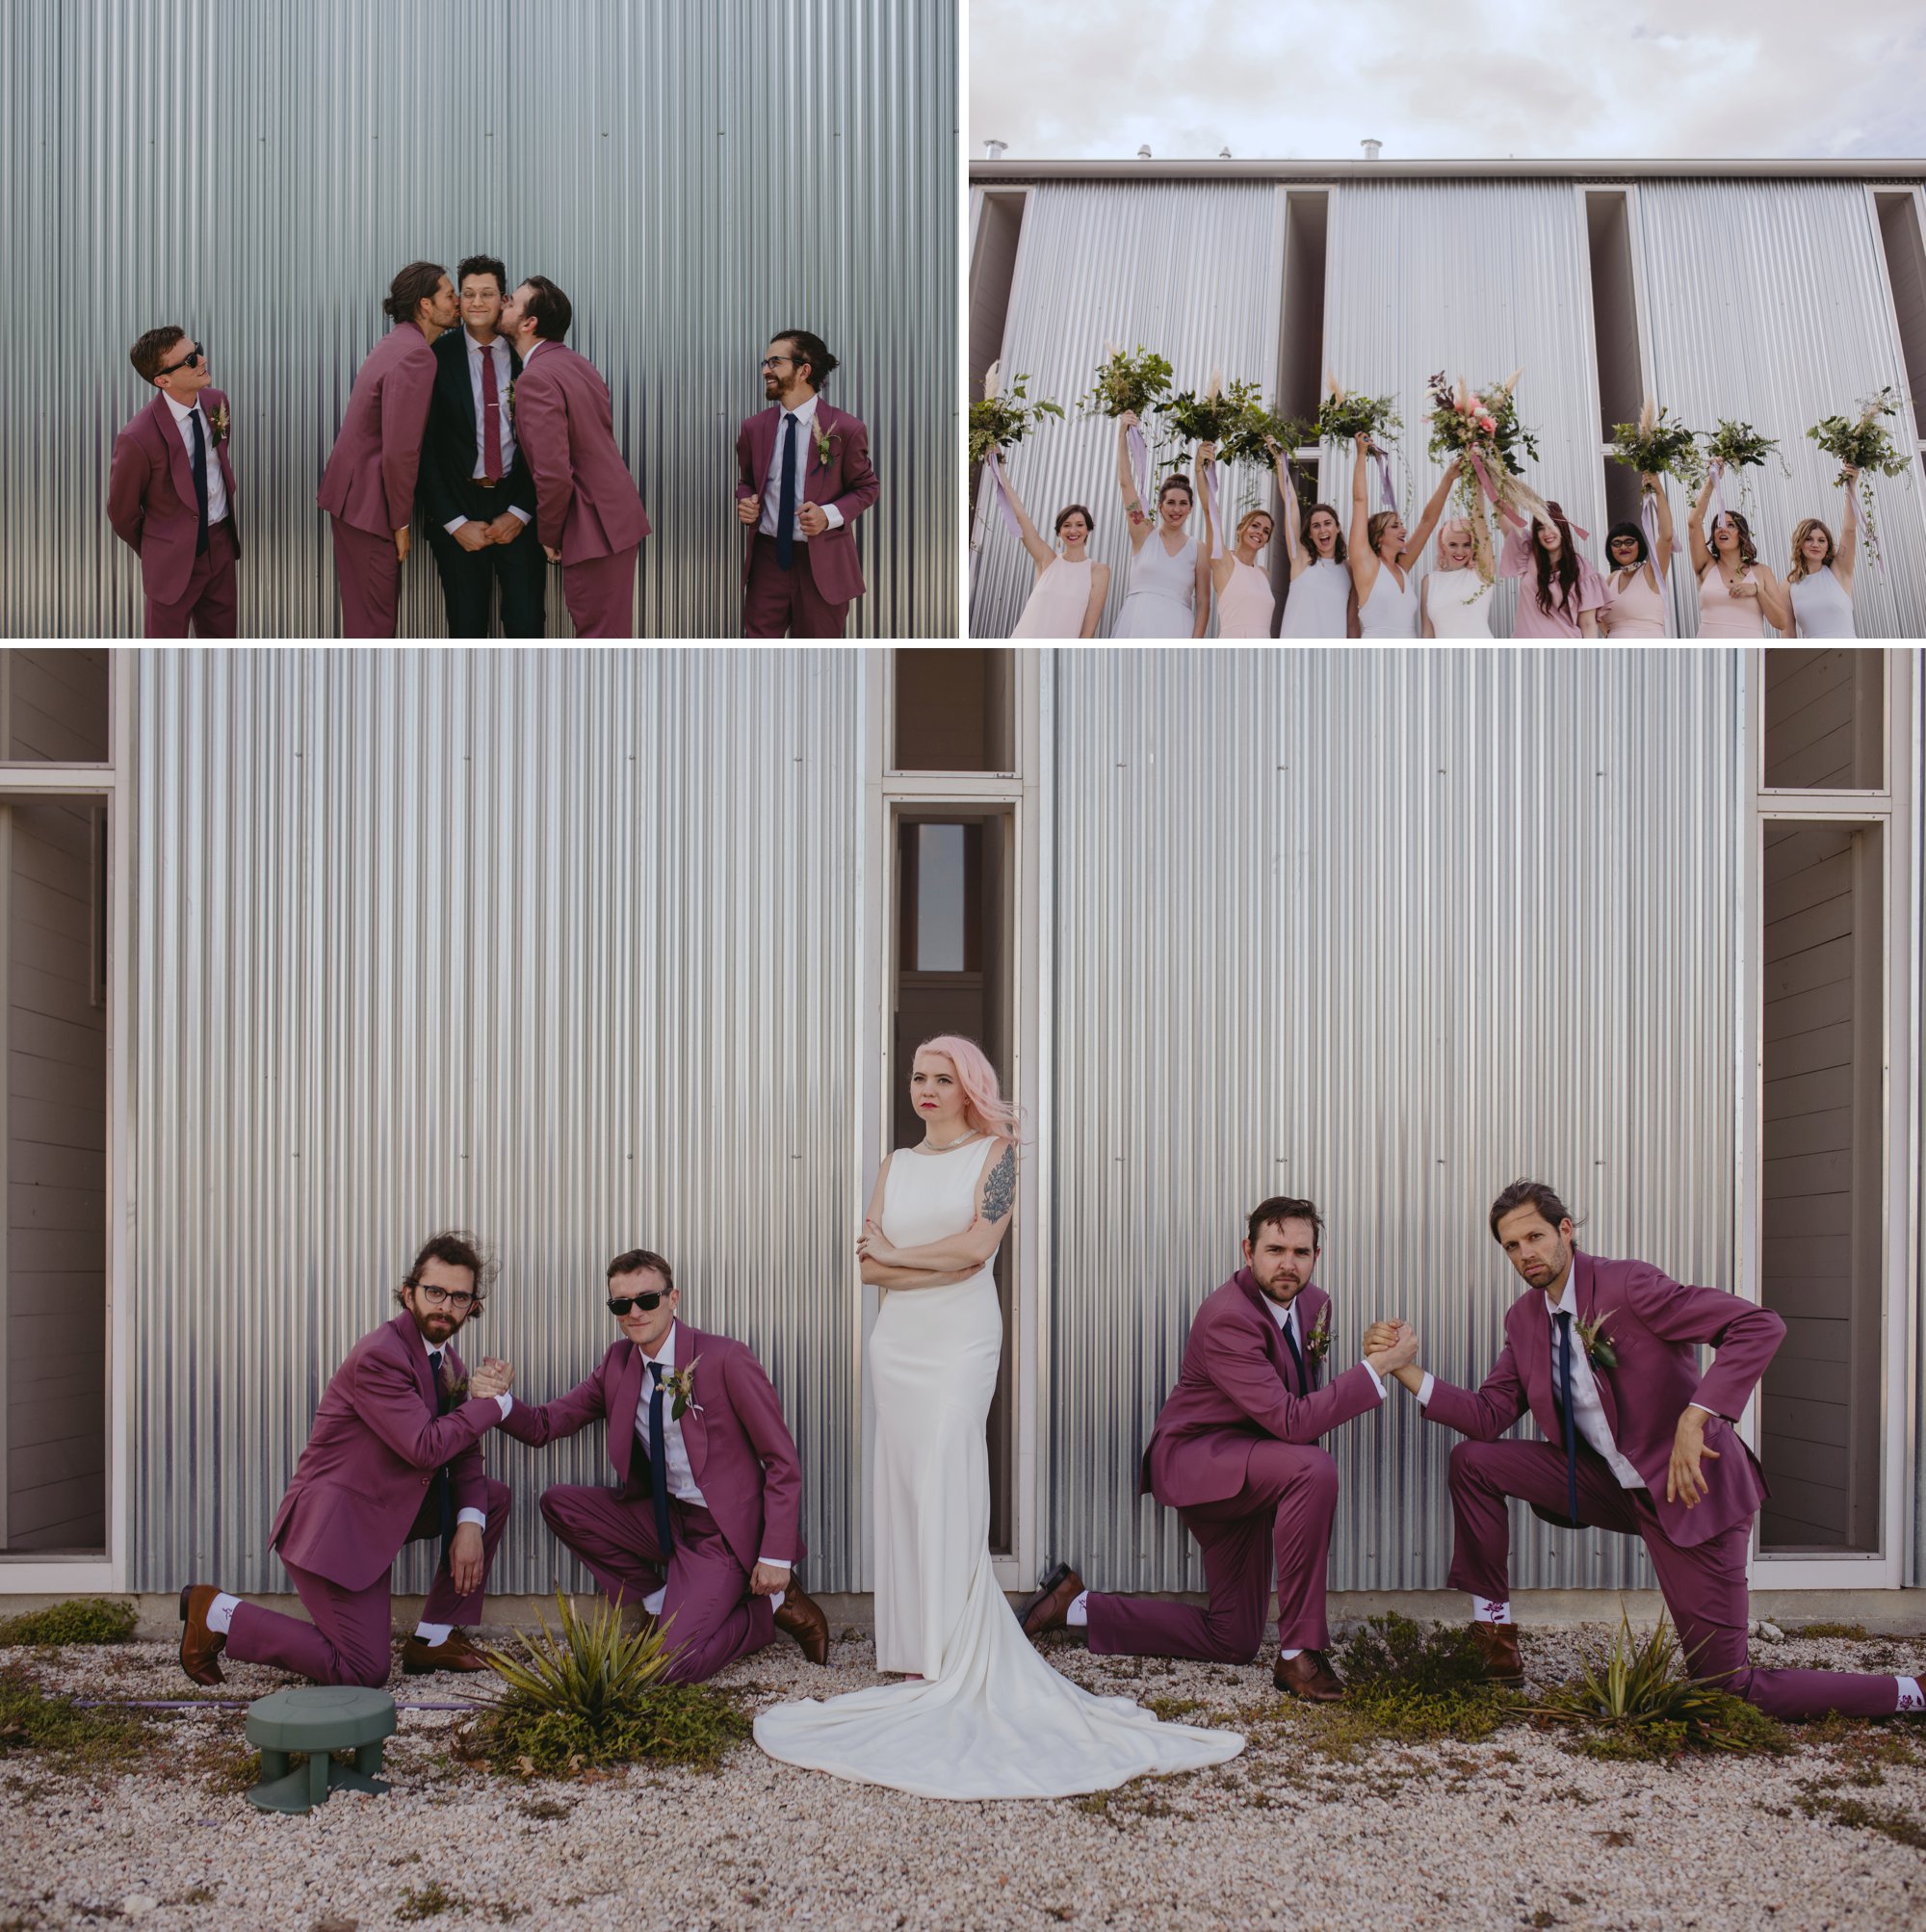 Bride with pink hair and groom in a purple suit prospect house wedding in austin tx with pastel decor and wild florals bridal party shots